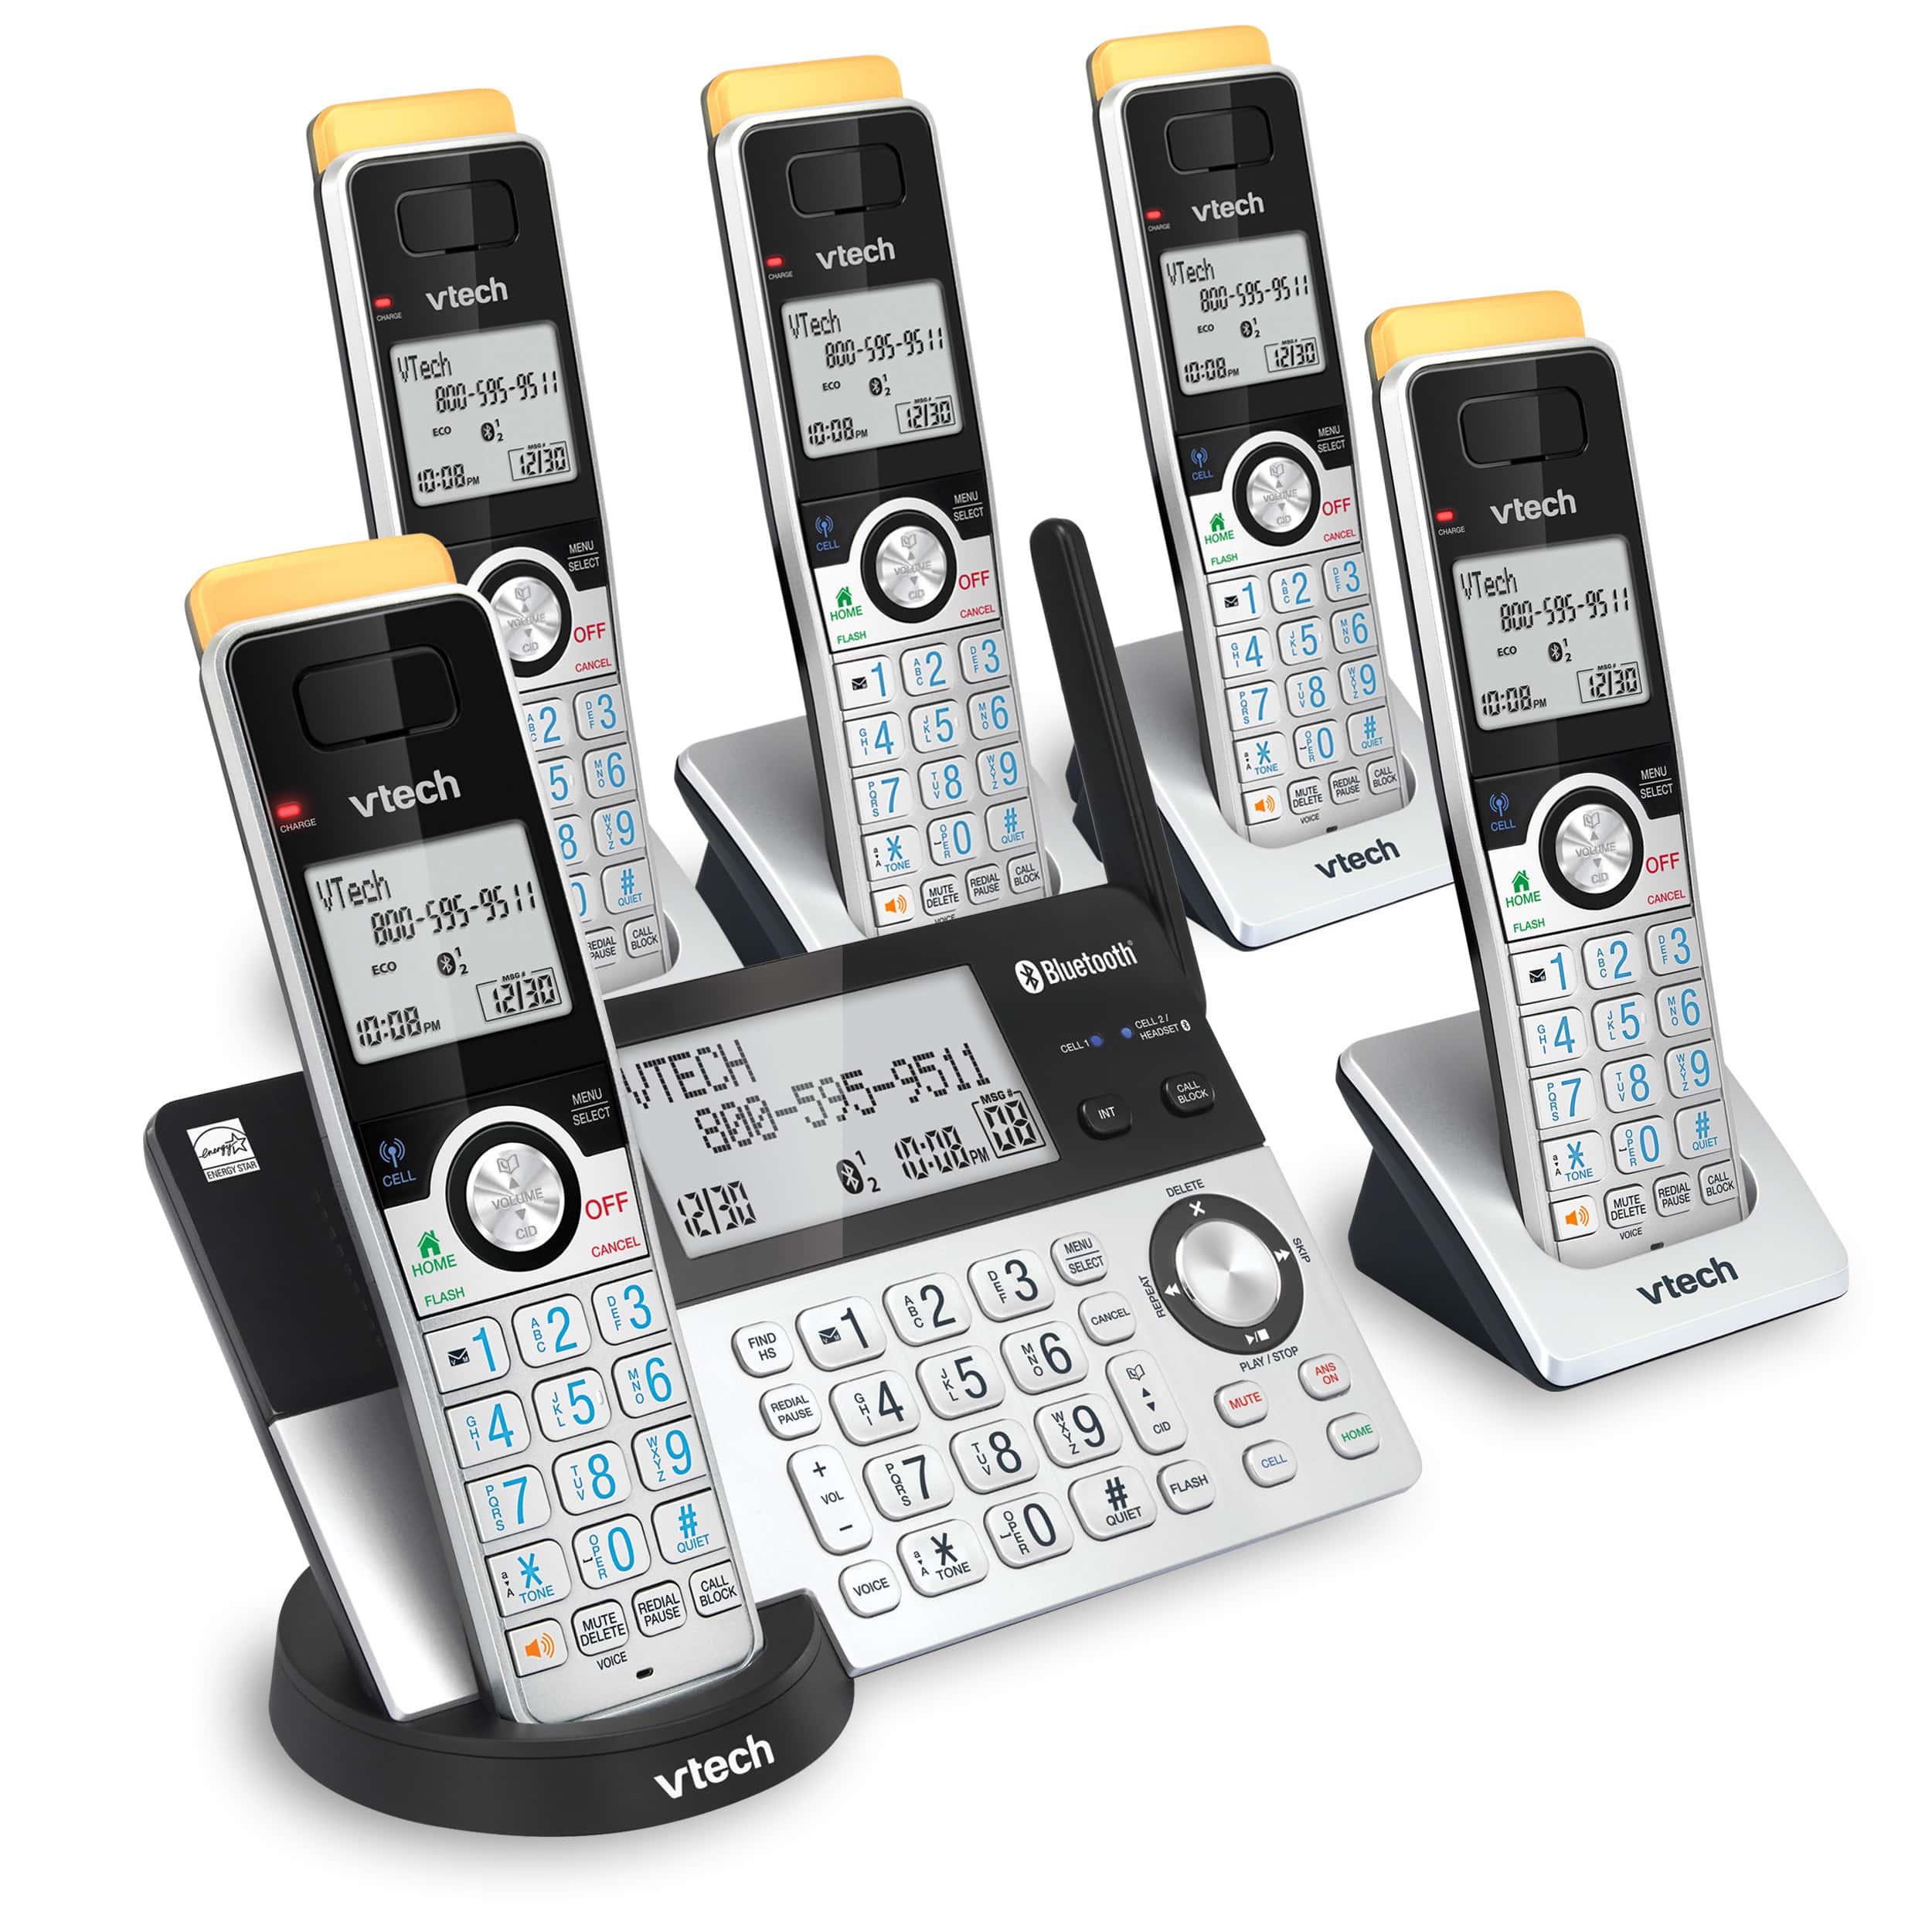 5-Handset Cordless Phone with Super Long Range, Bluetooth Connect to Cell, Smart Call Blocker and Answering System - view 9